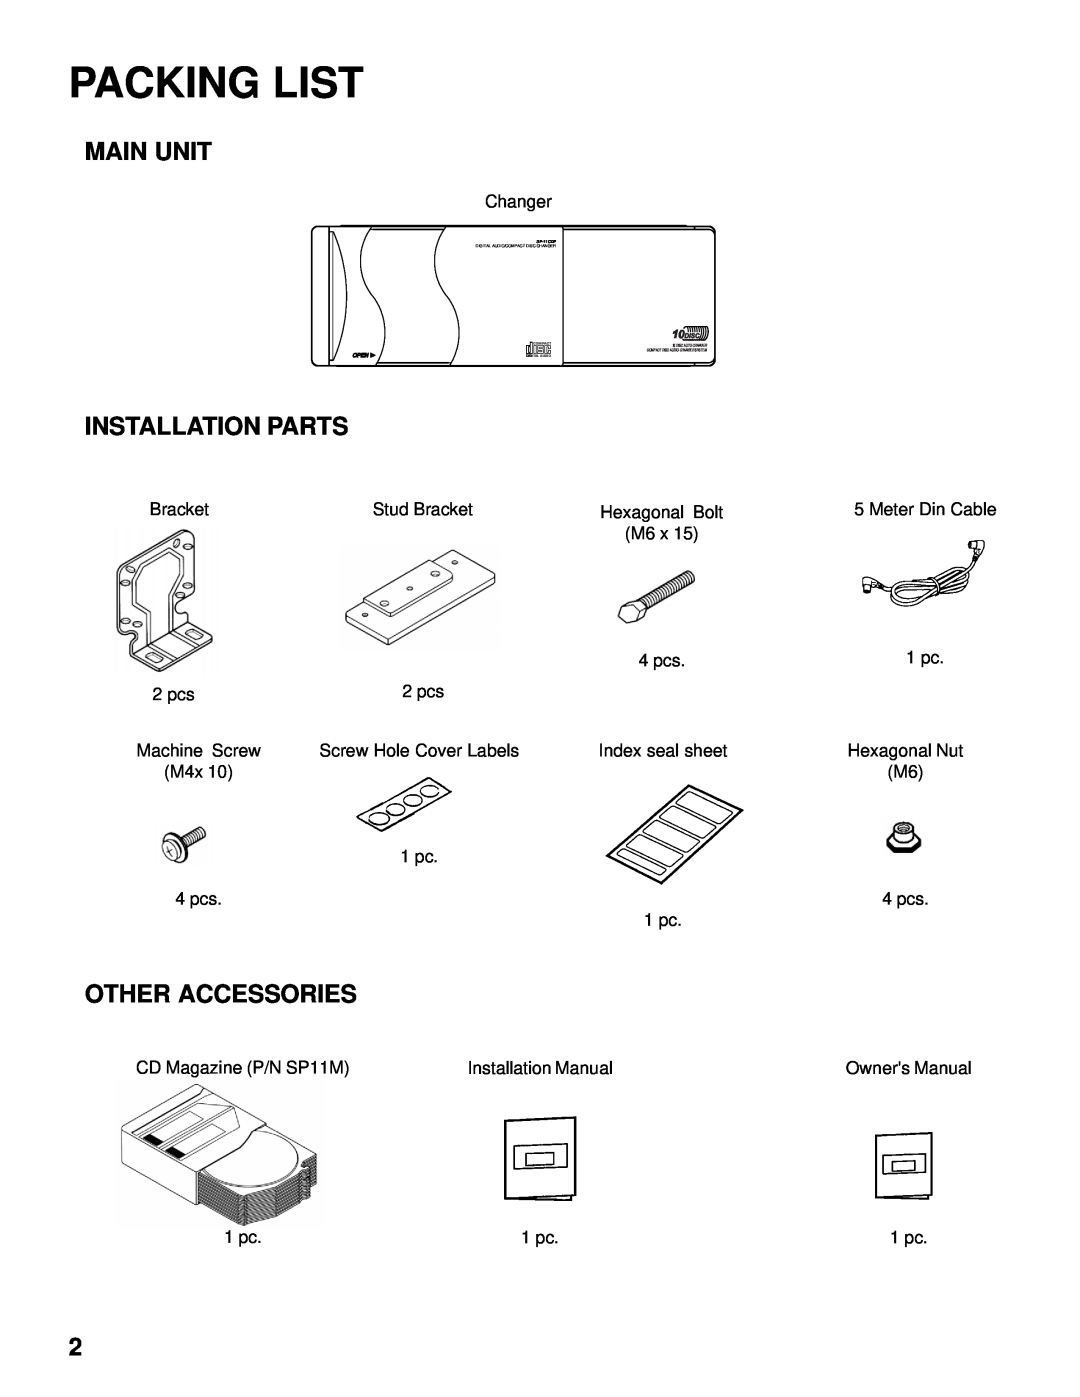 Audiovox SP-11CD installation manual Packing List, Main Unit, Installation Parts, Other Accessories, Changer 